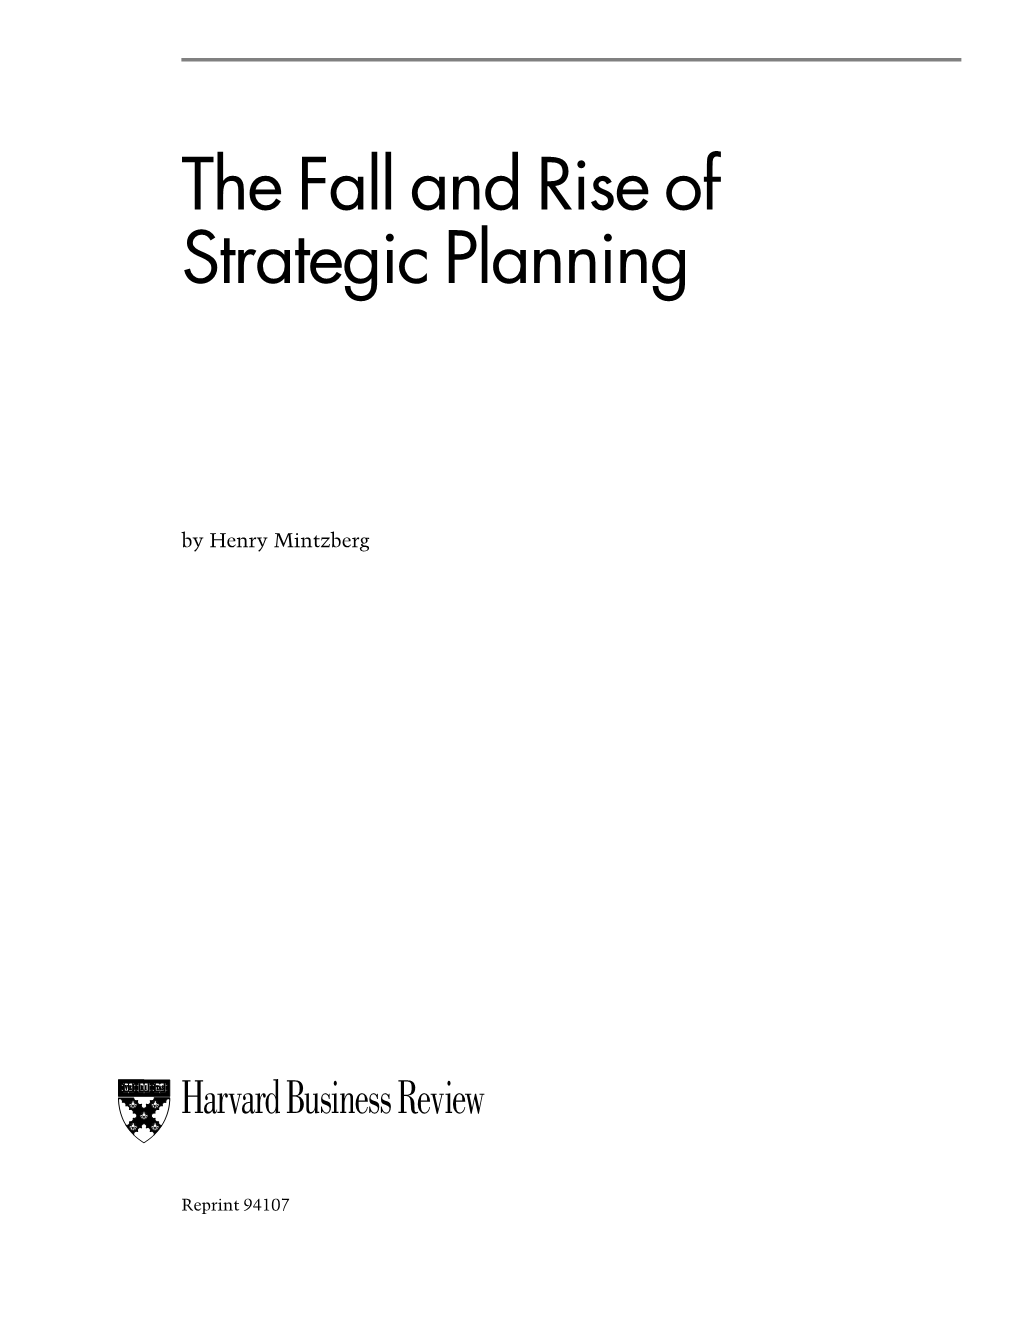 The Fall and Rise of Strategic Planning